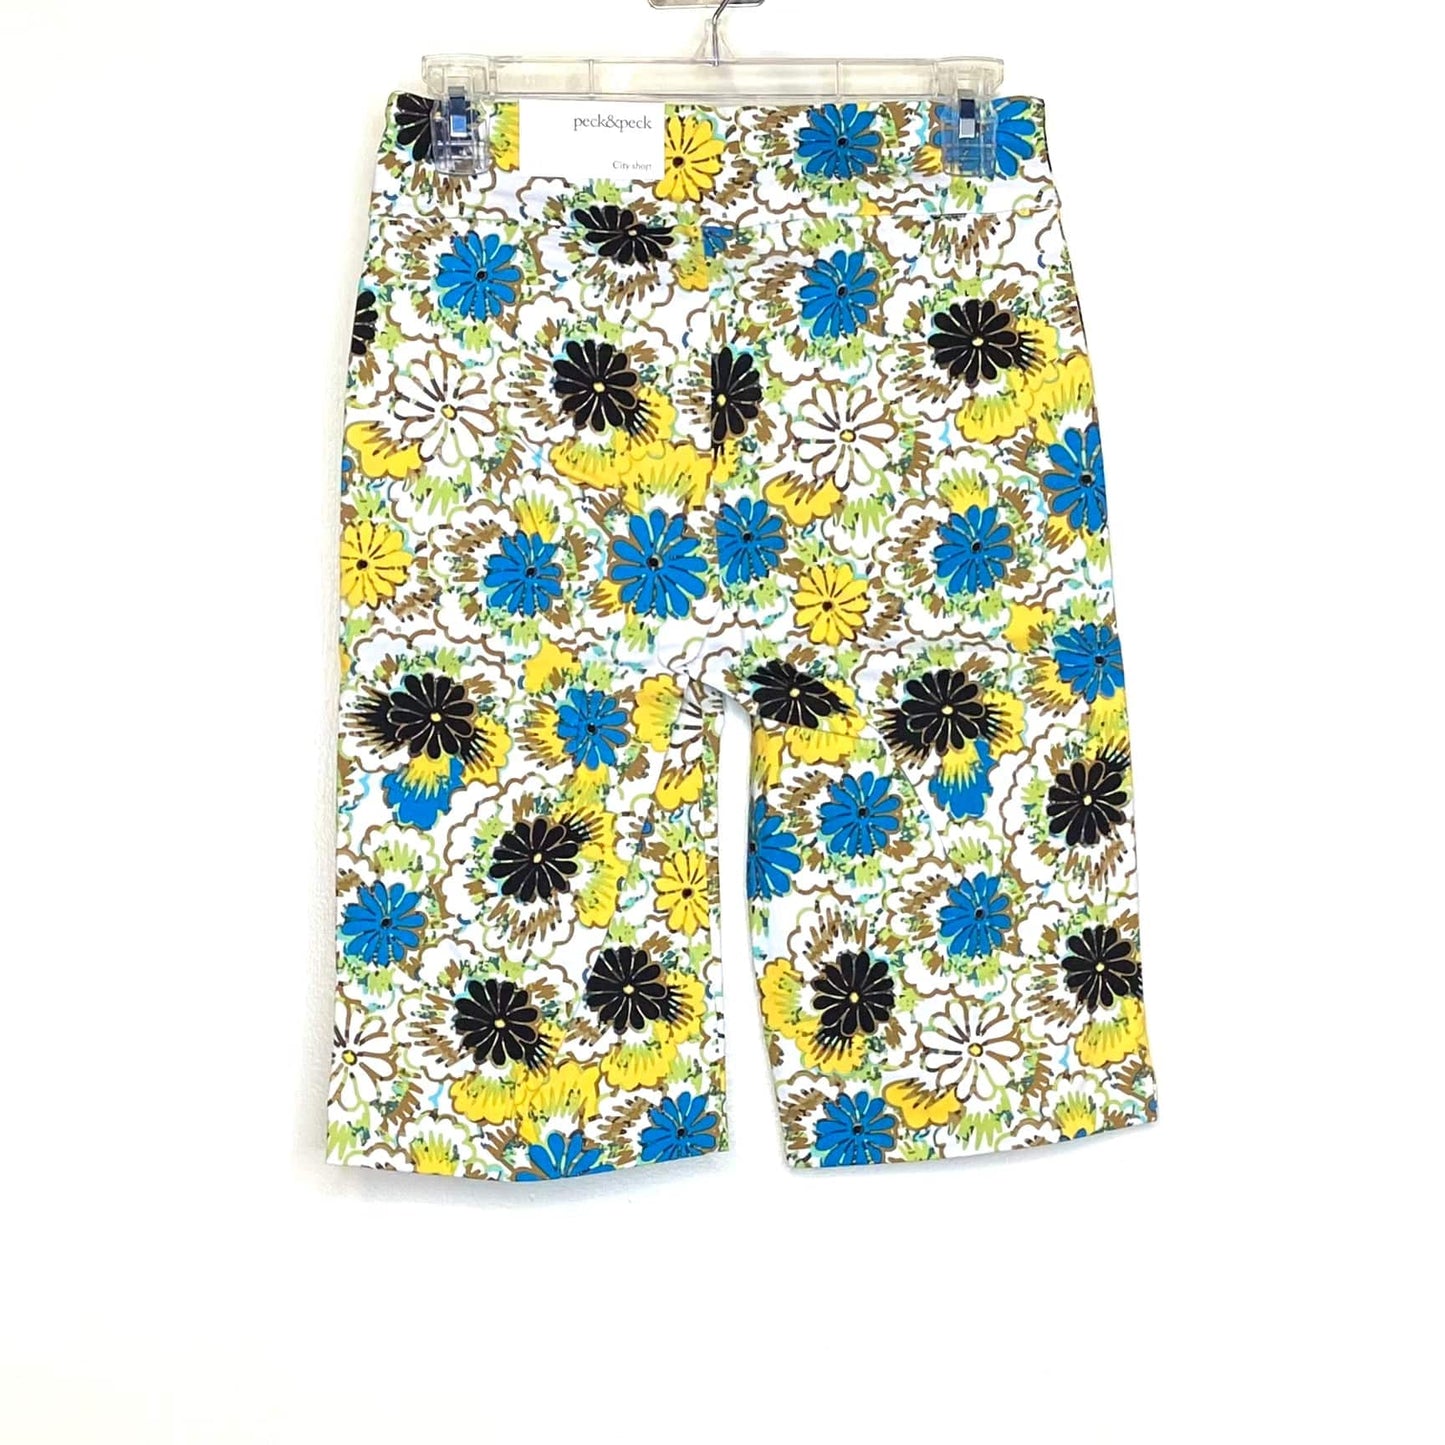 Peck & Peck Womens Size 4 ”City Short” Retro Yellow Blue Floral Stretch Shorts